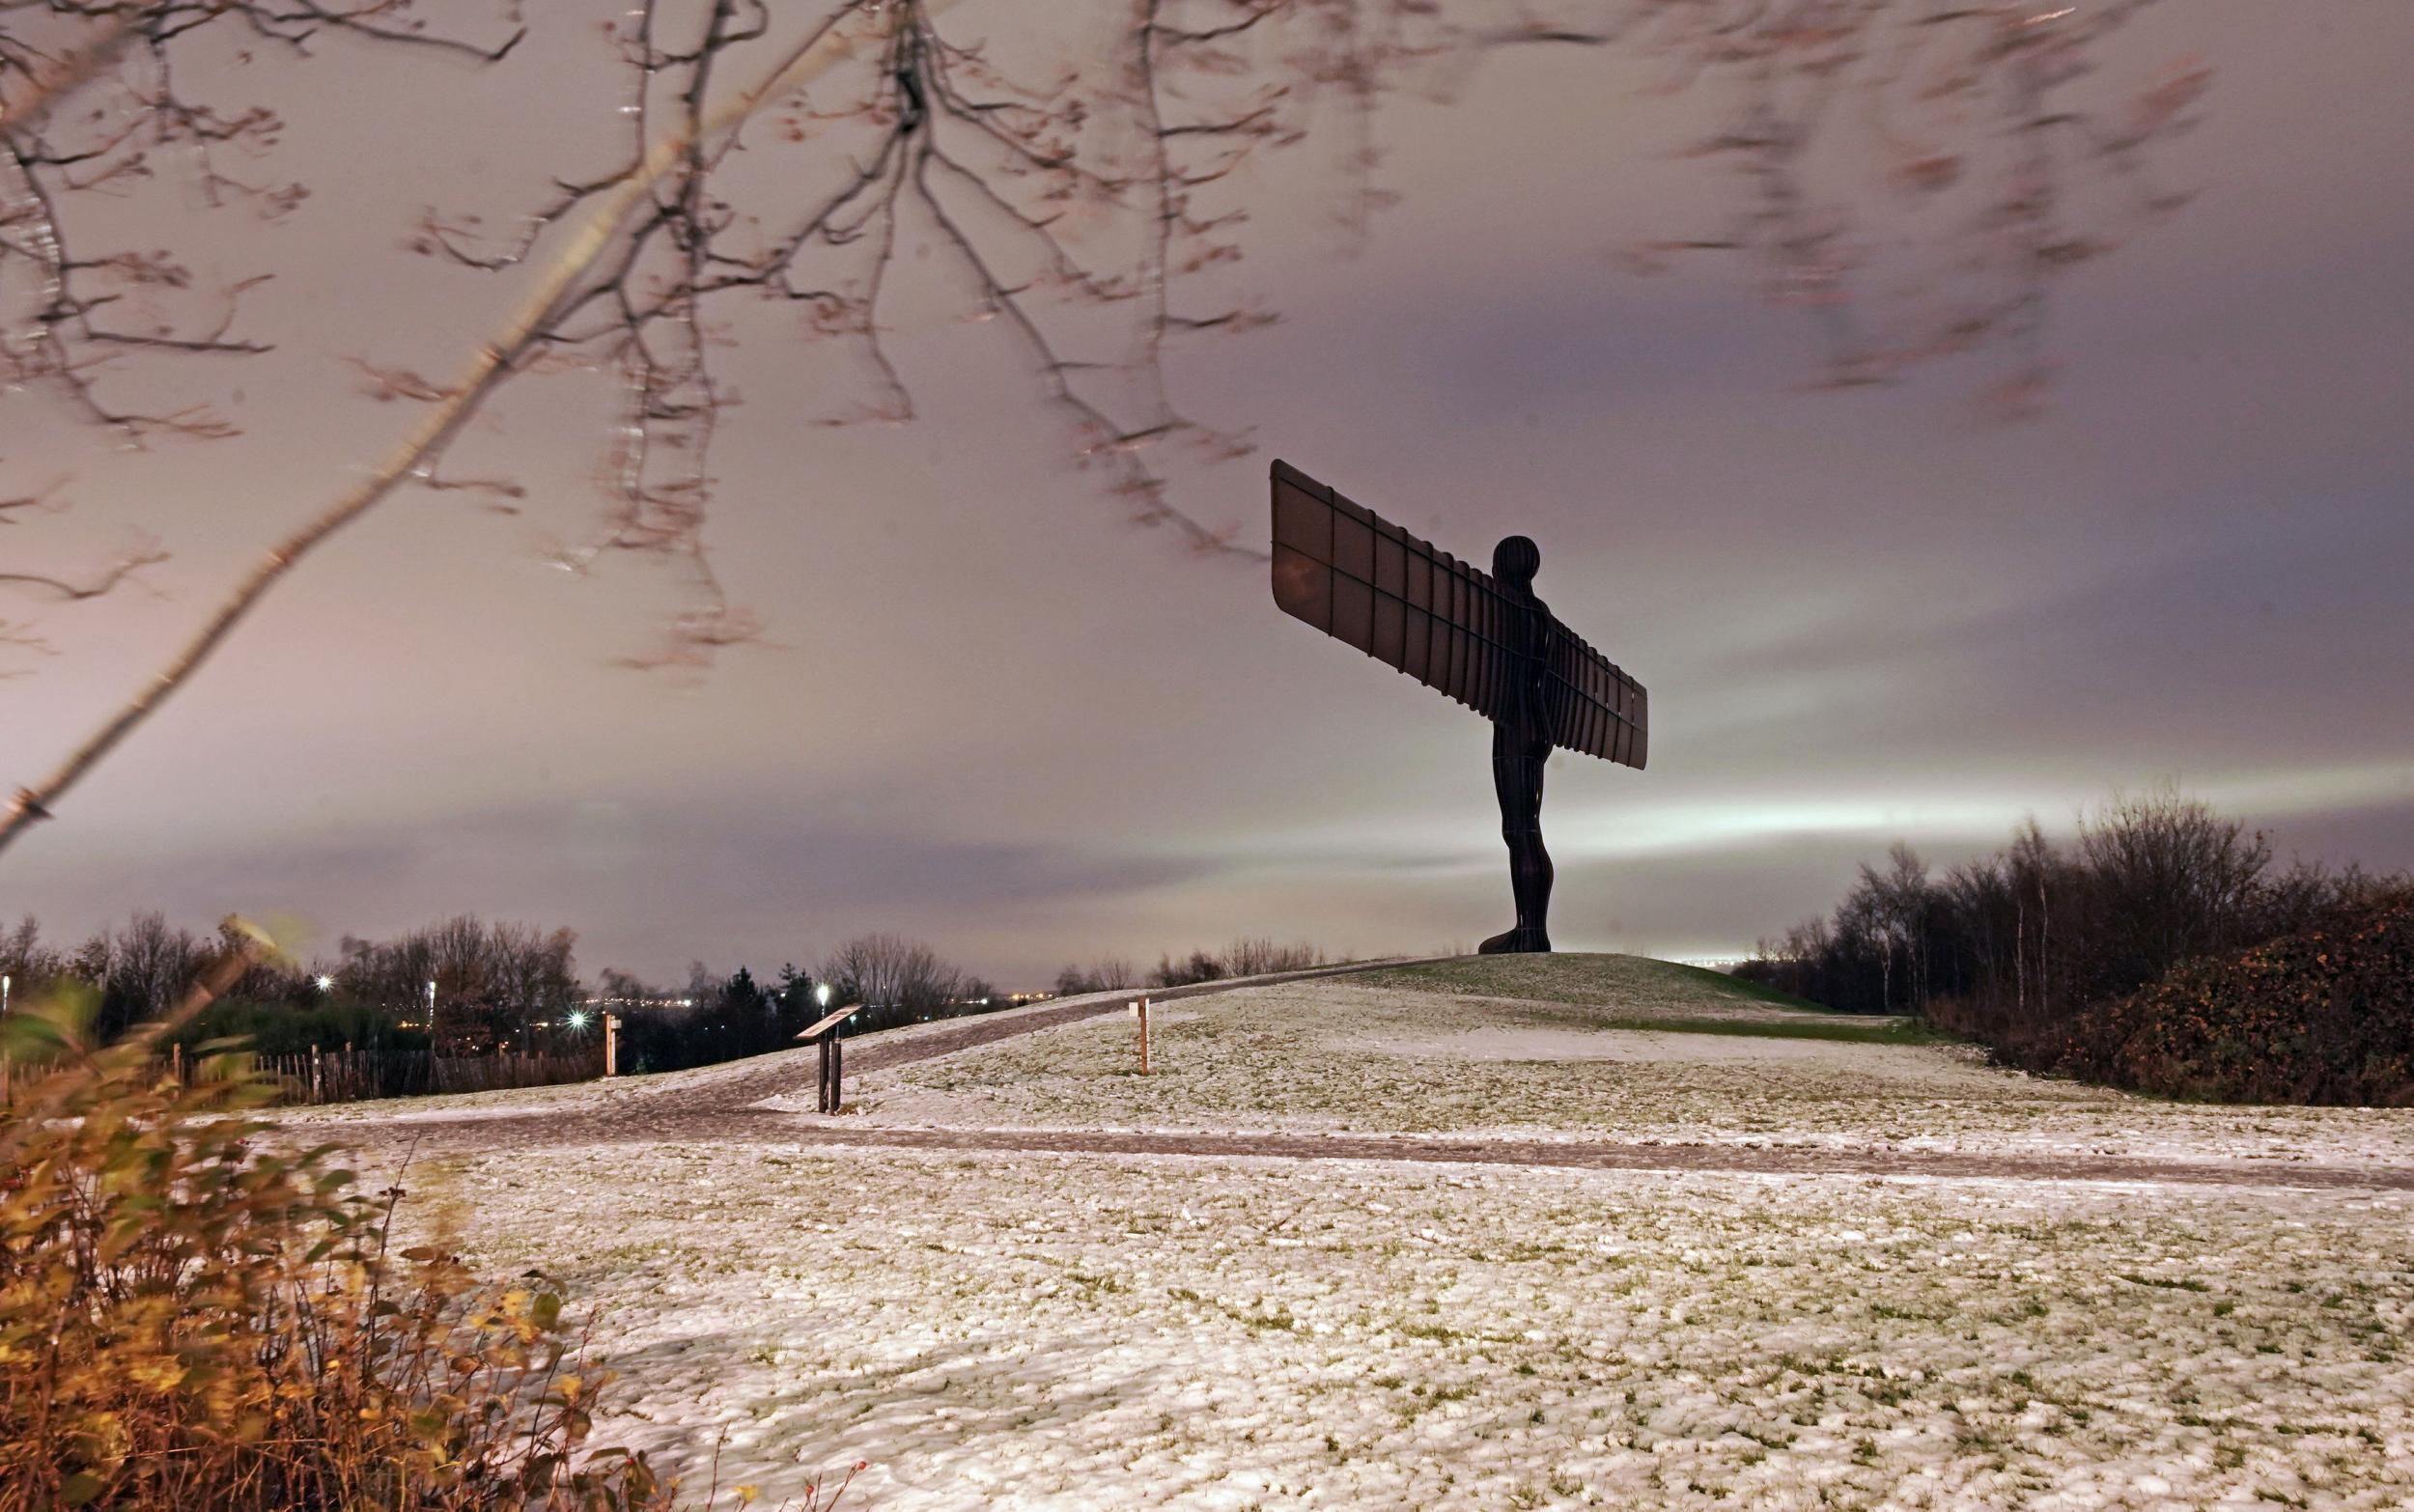 Snow showers were seen across north-east England including at the Angel of the North in Gateshead